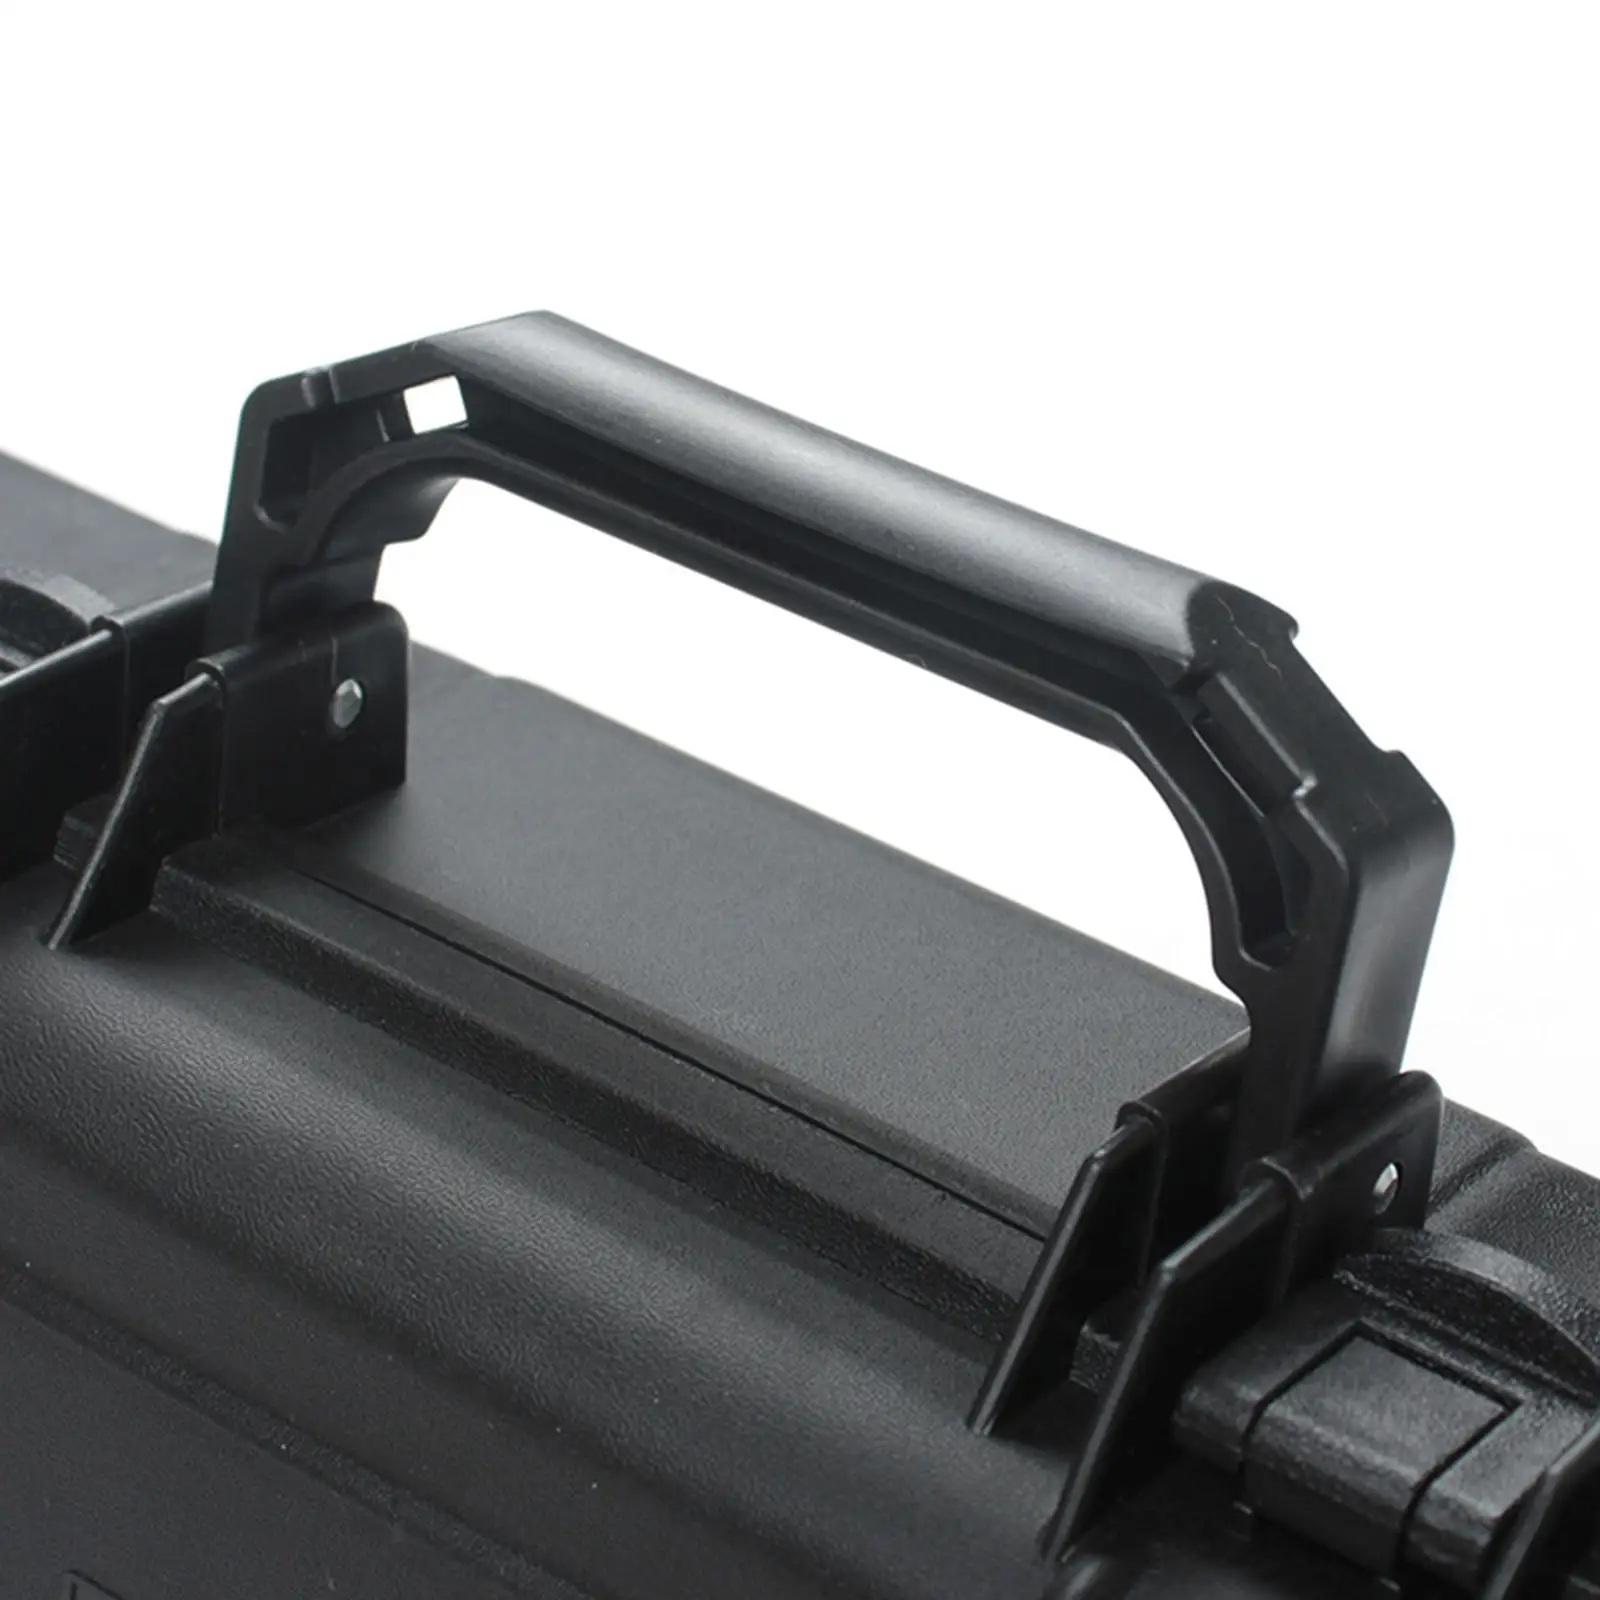 GC-6 Toolbox Shockproof Anti-Collision Portable Waterproof with Pre-Cut Foam Safety 1PC Instrument Case Tool Box Instrument Case